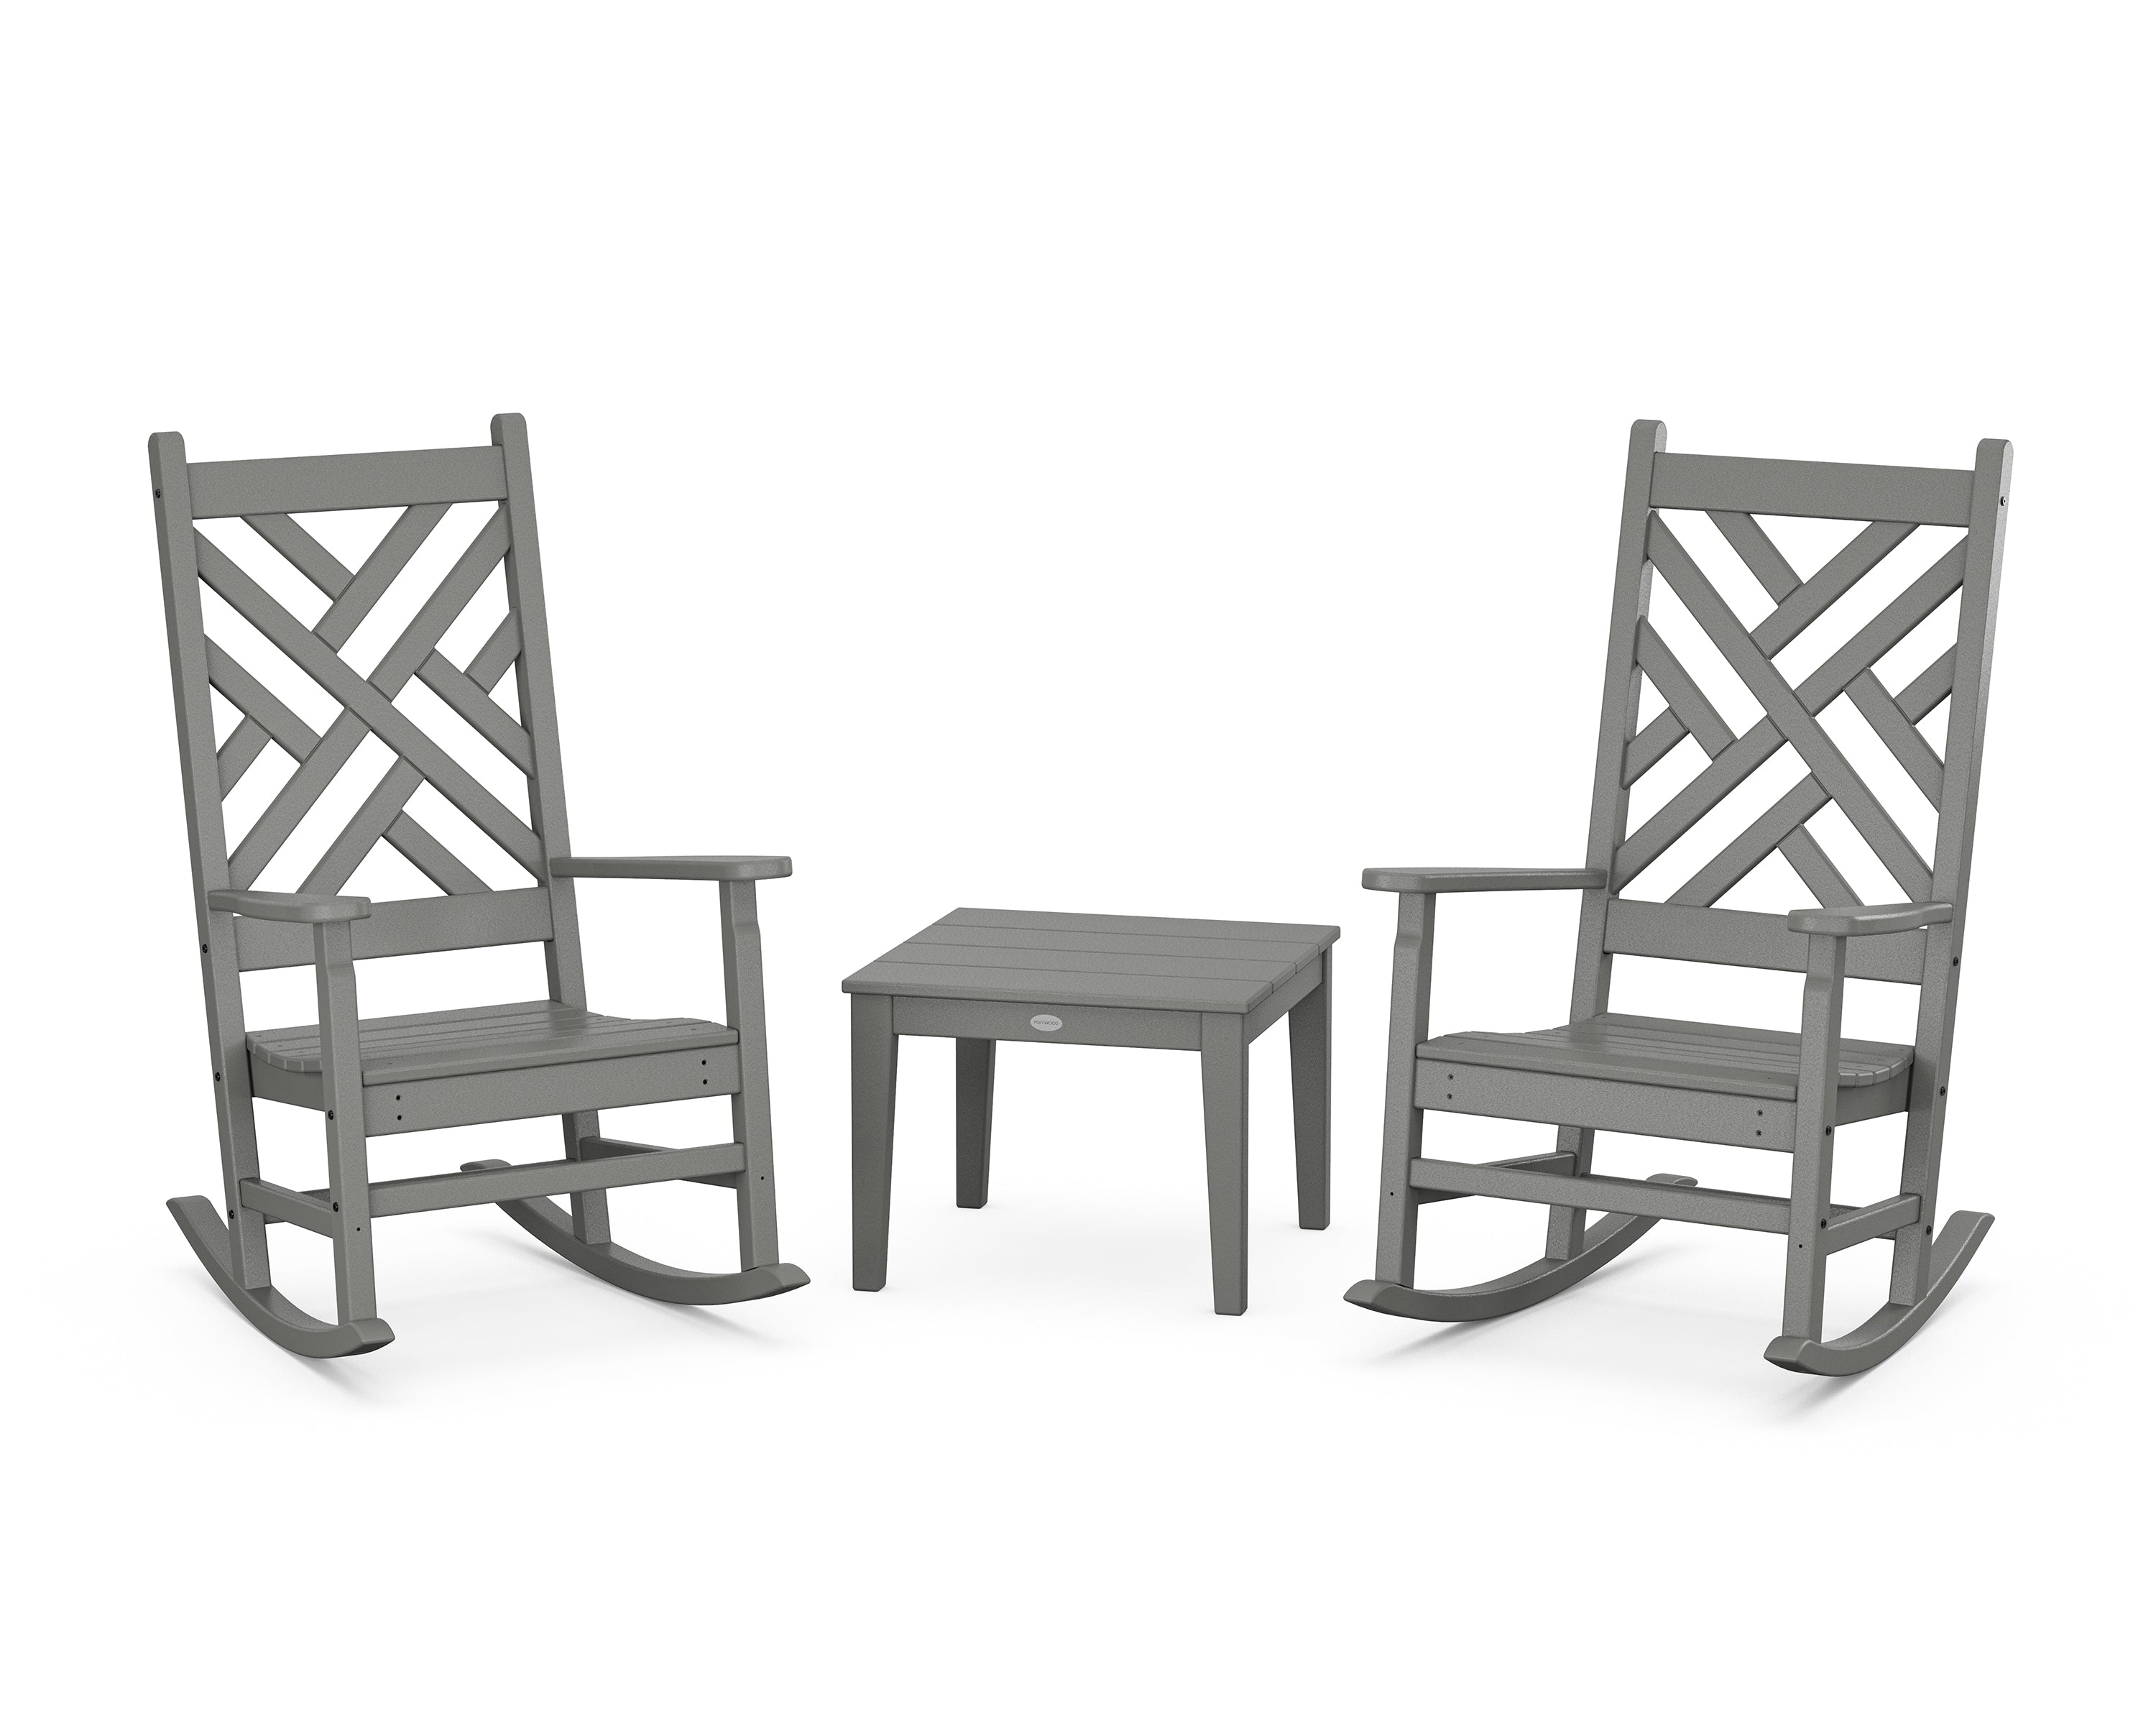 POLYWOOD® Chippendale 3-Piece Rocking Chair Set in Slate Grey